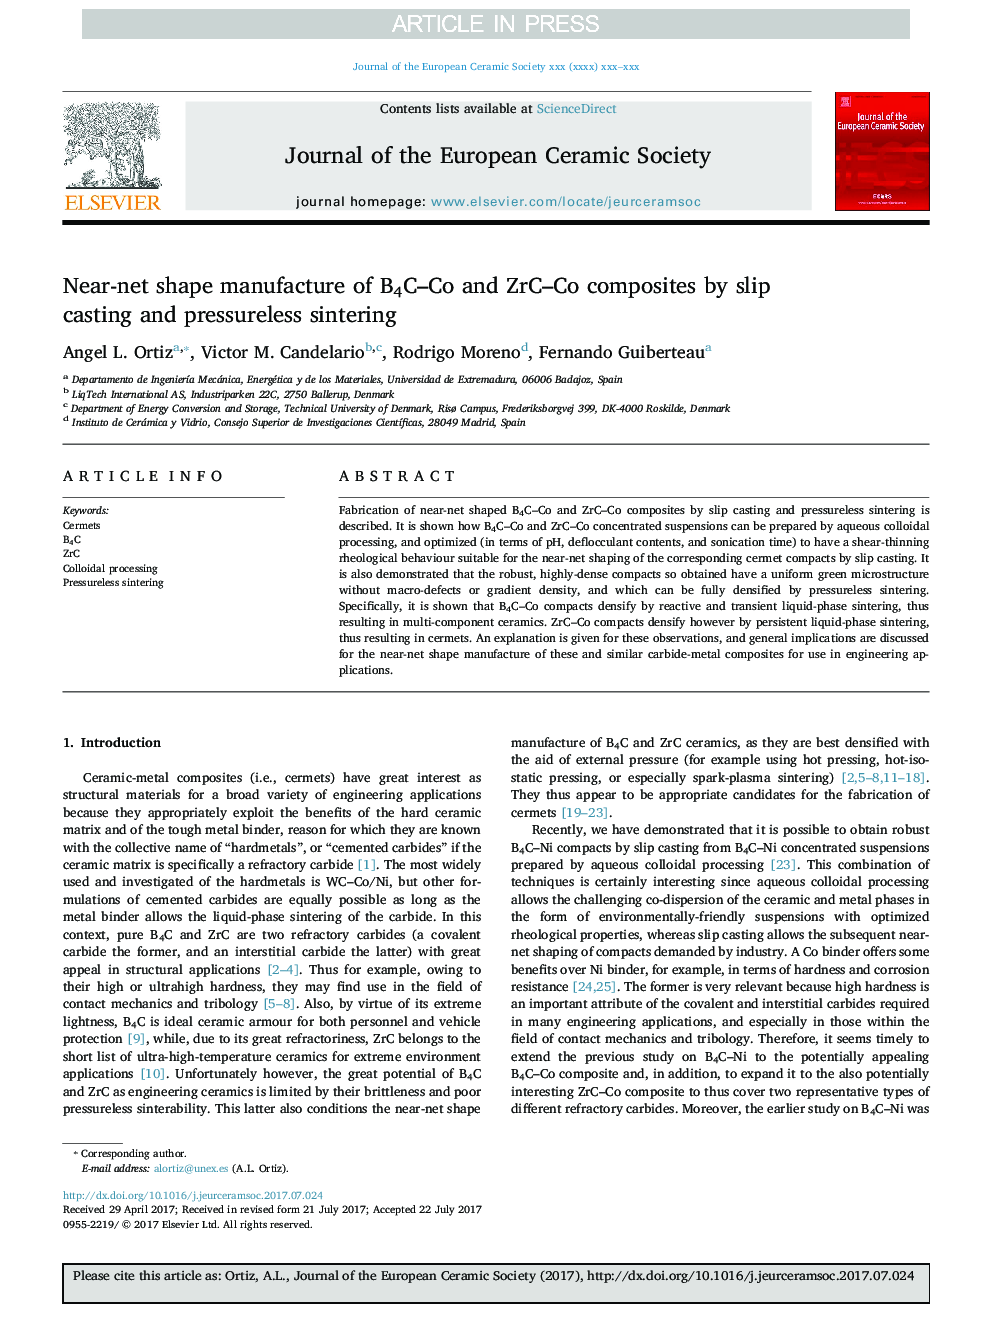 Near-net shape manufacture of B4C-Co and ZrC-Co composites by slip casting and pressureless sintering